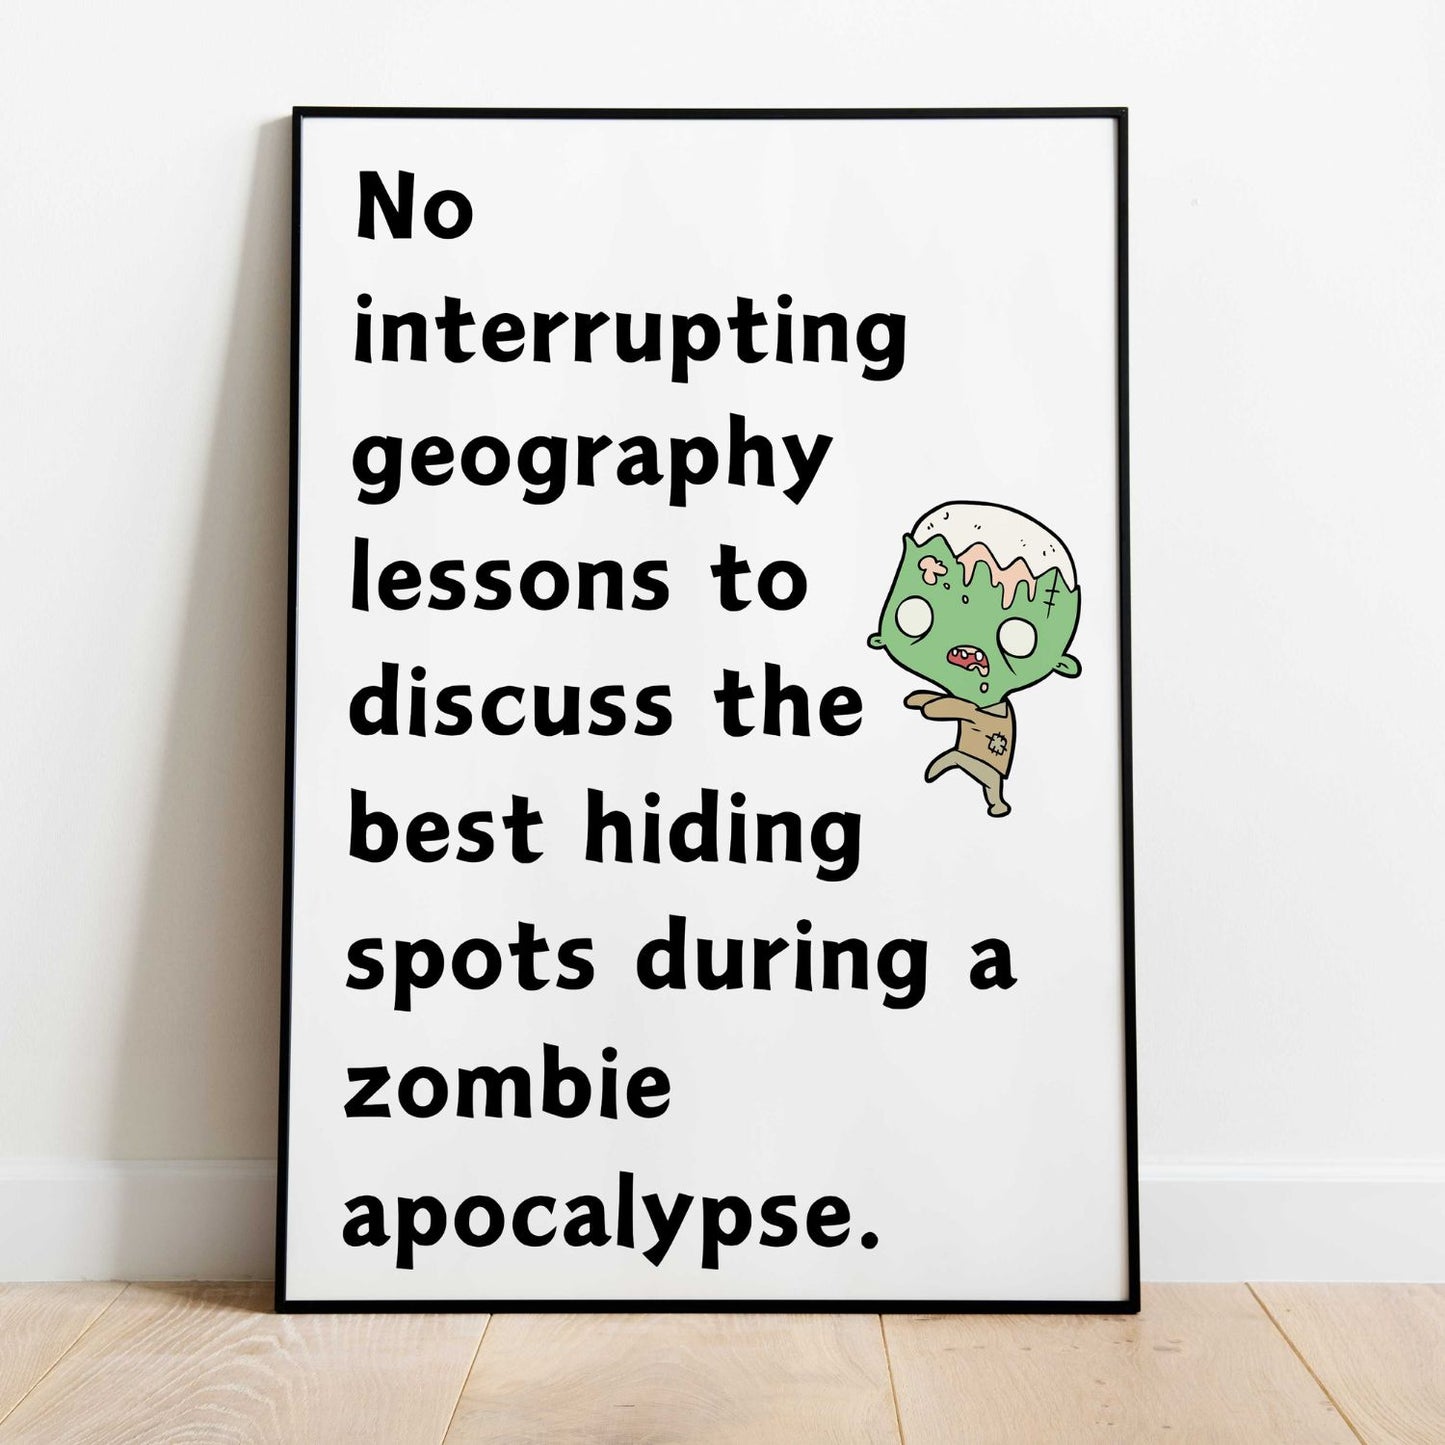 Funny classroom rules poster for geography classroom decoration